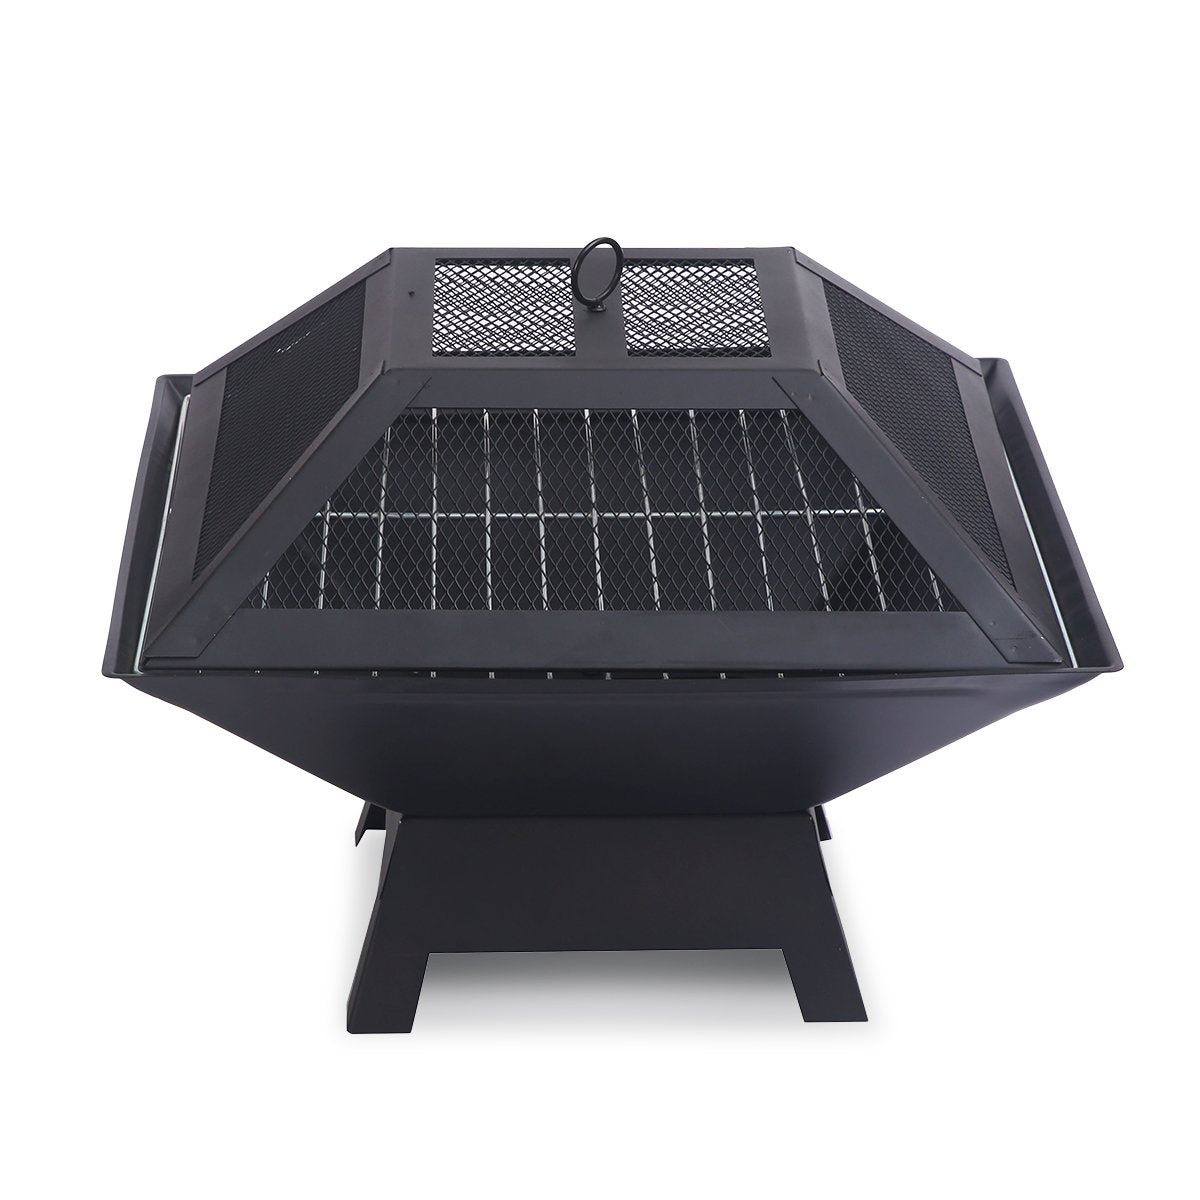 Wallaroo Outdoor Fire Pit for BBQ, Grilling, Cooking, Camping Portable